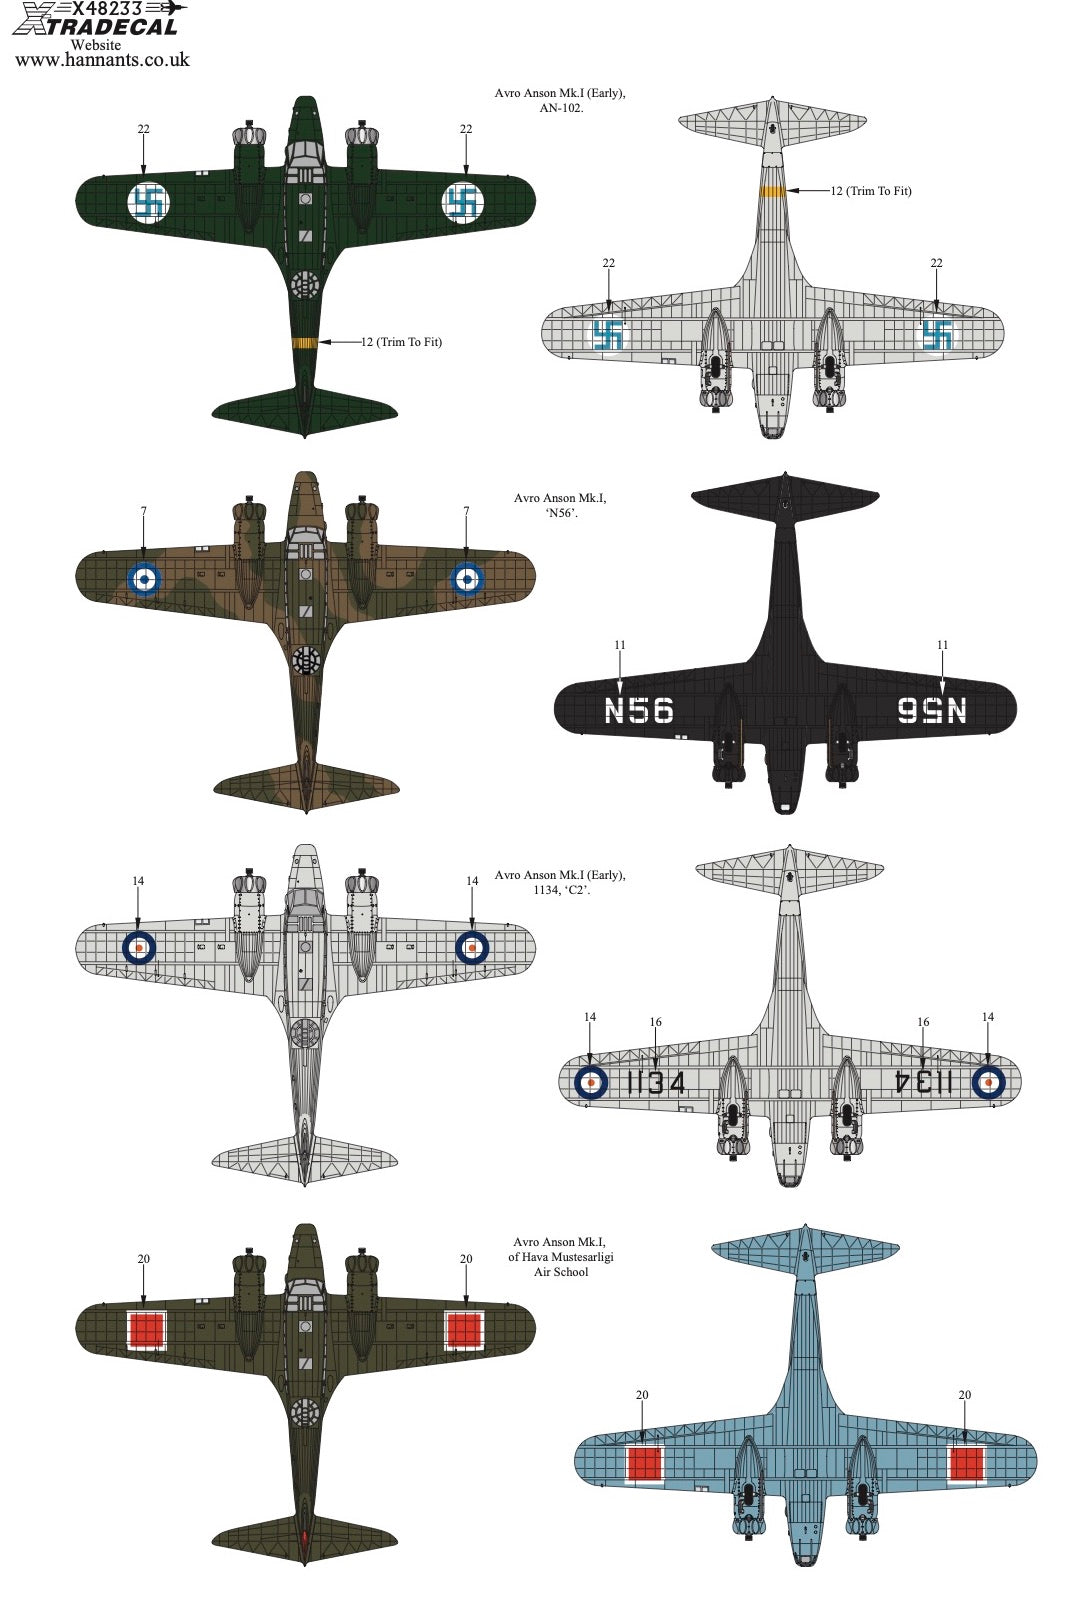 Xtradecal X48233 Avro Anson Mk.I Collection Part 3 1/48